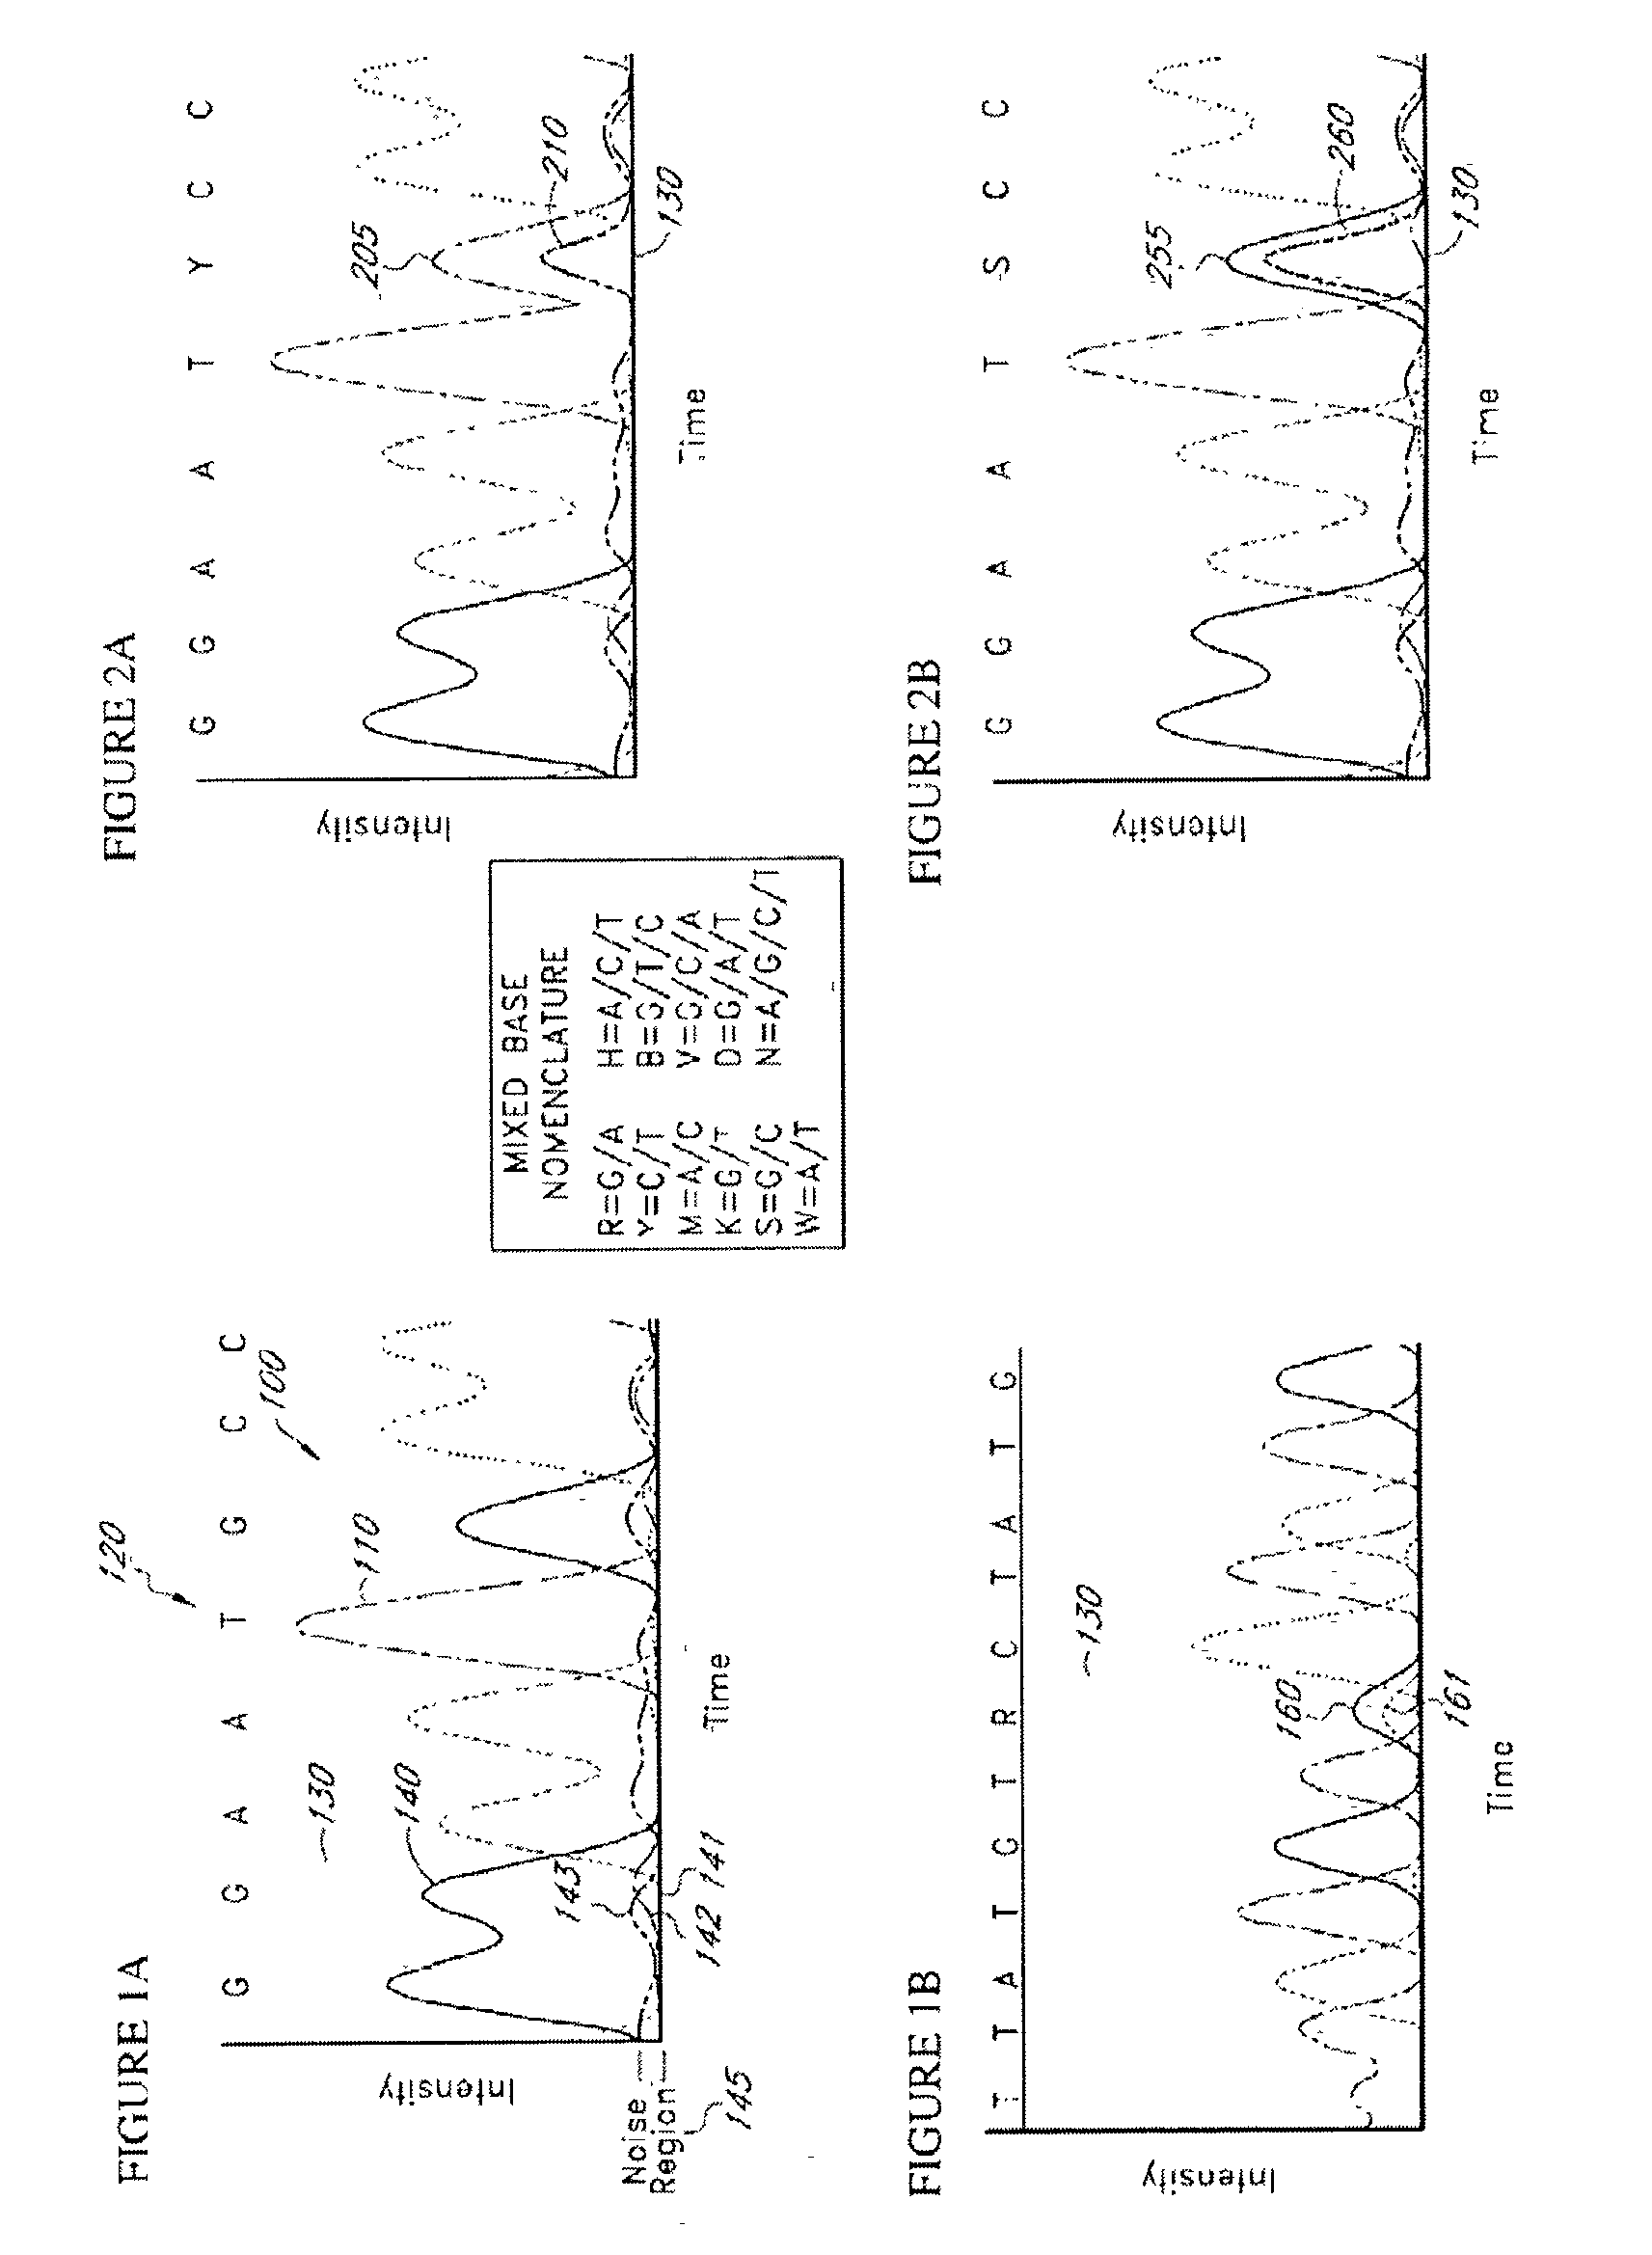 System and method for consensus-calling with per-base quality values for sample assemblies